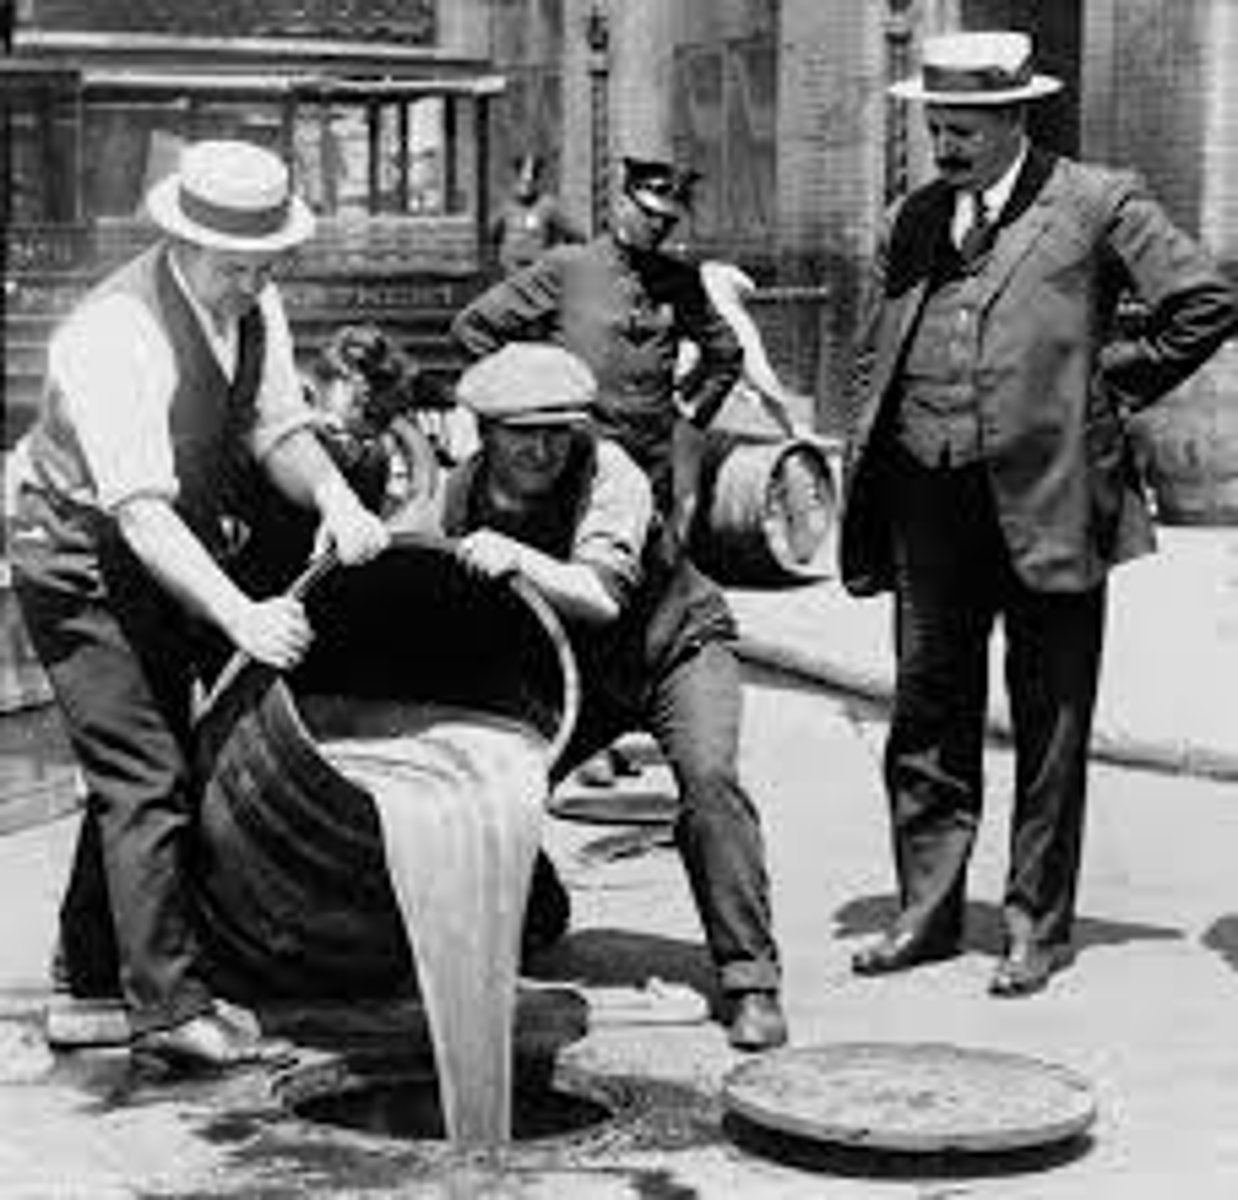 <p>A nationwide constitutional ban on the production, importation, transportation and sale of alcoholic beverages that remained in place from 1920 to 1933.</p>